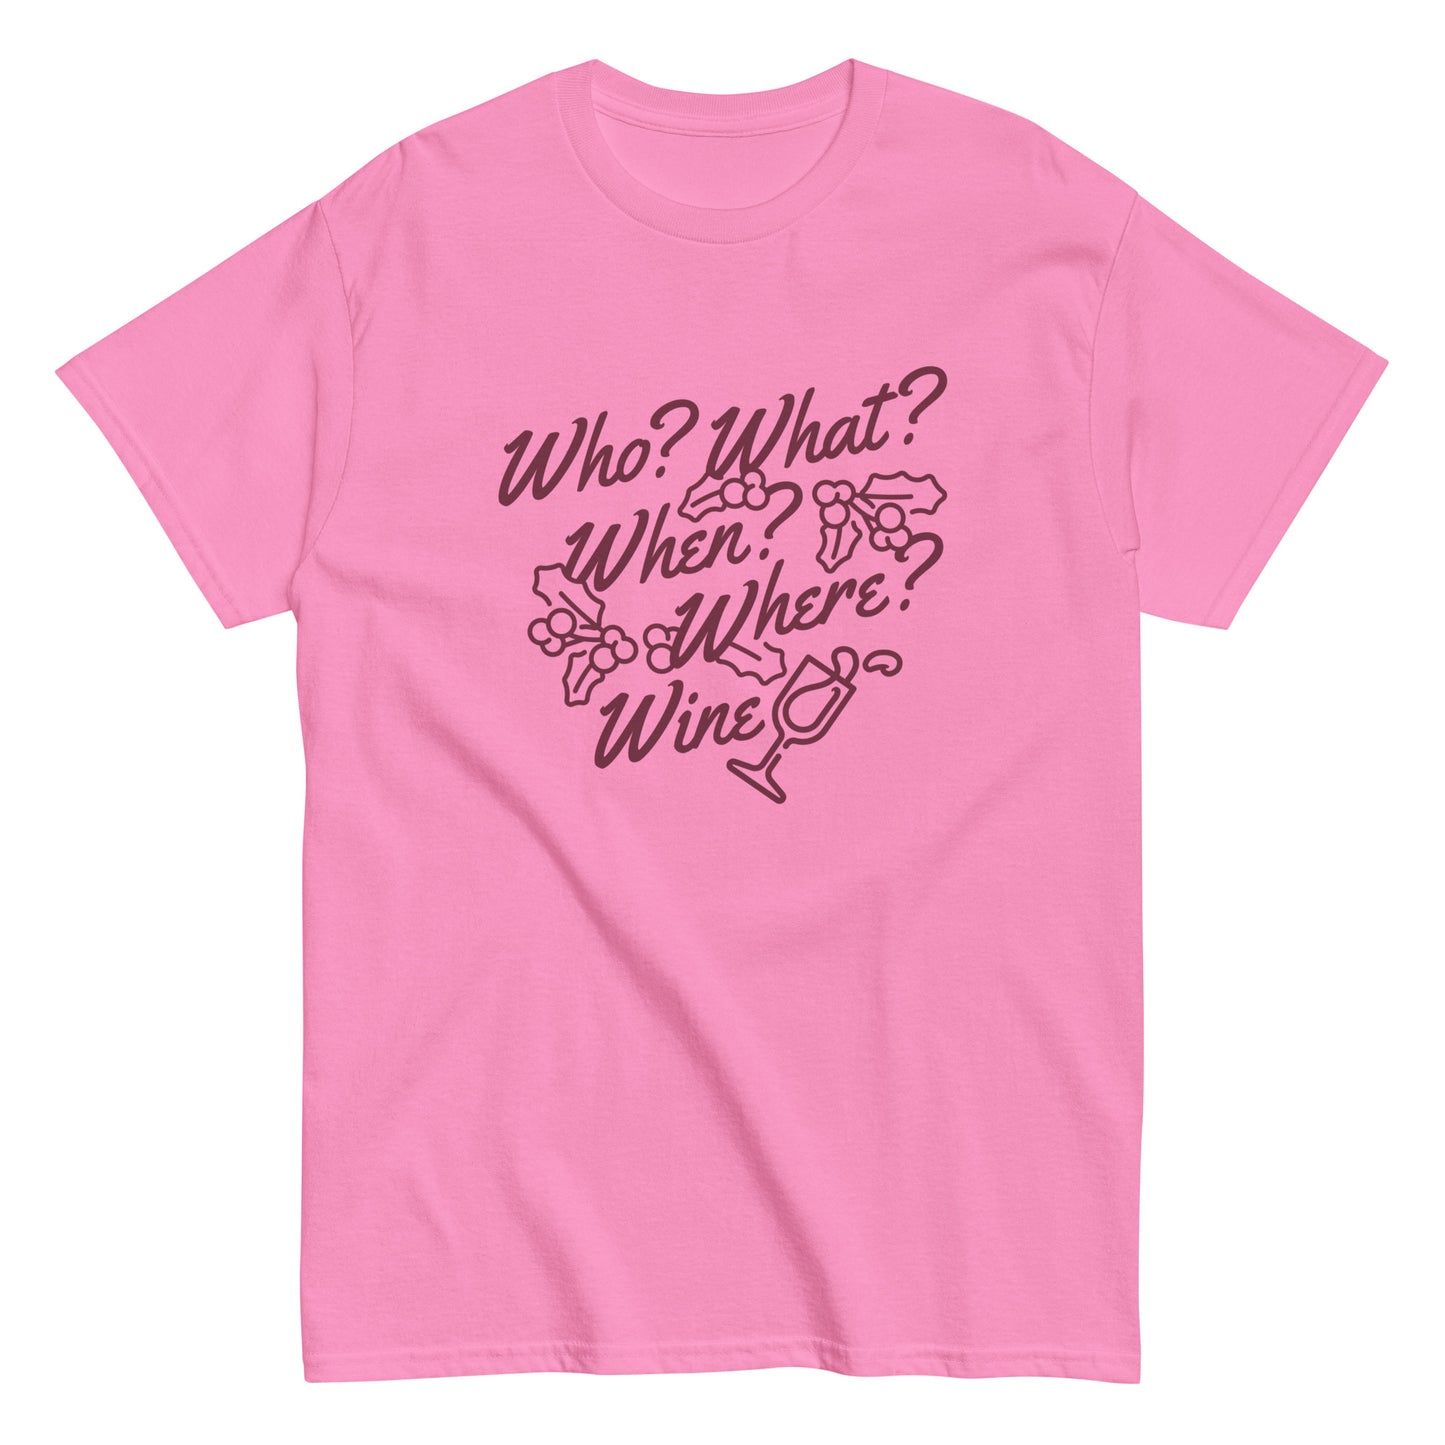 Who? What? When? Where? Wine? Men's Classic Tee